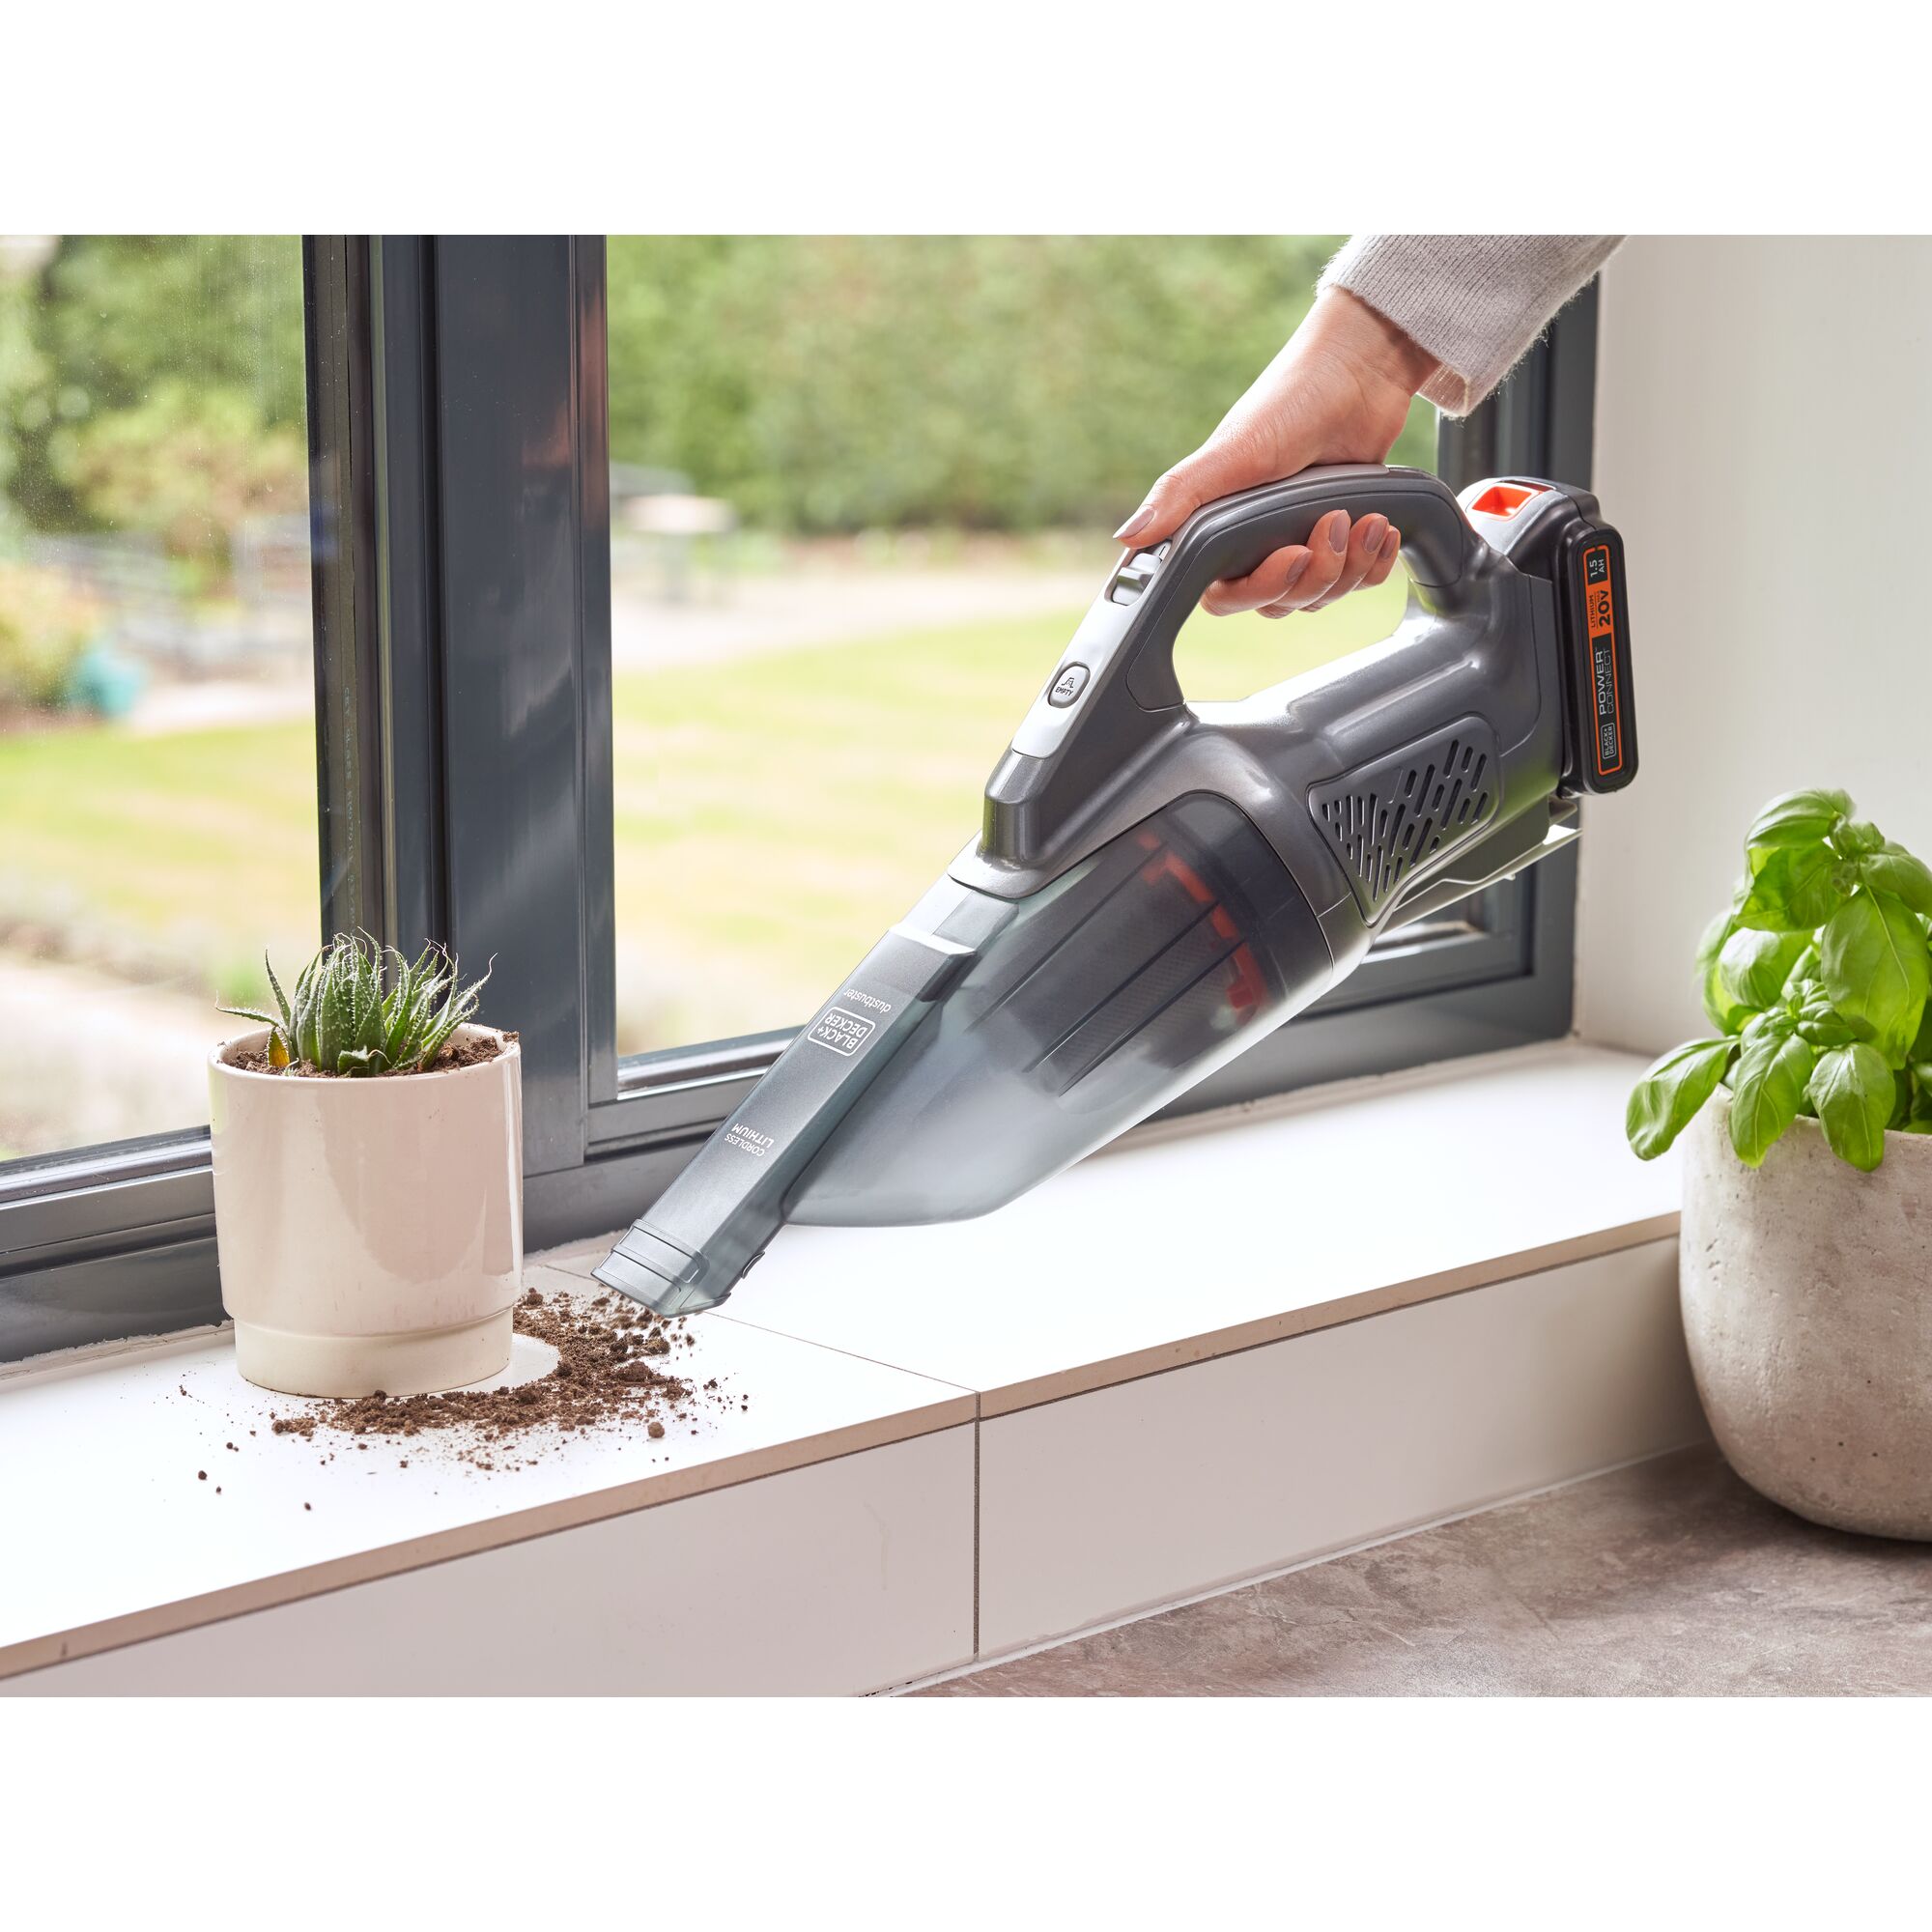 Person using 20 volt MAX Powerconnect handheld vacuum to clean up spilled dirt next to a potted plant on a window sill